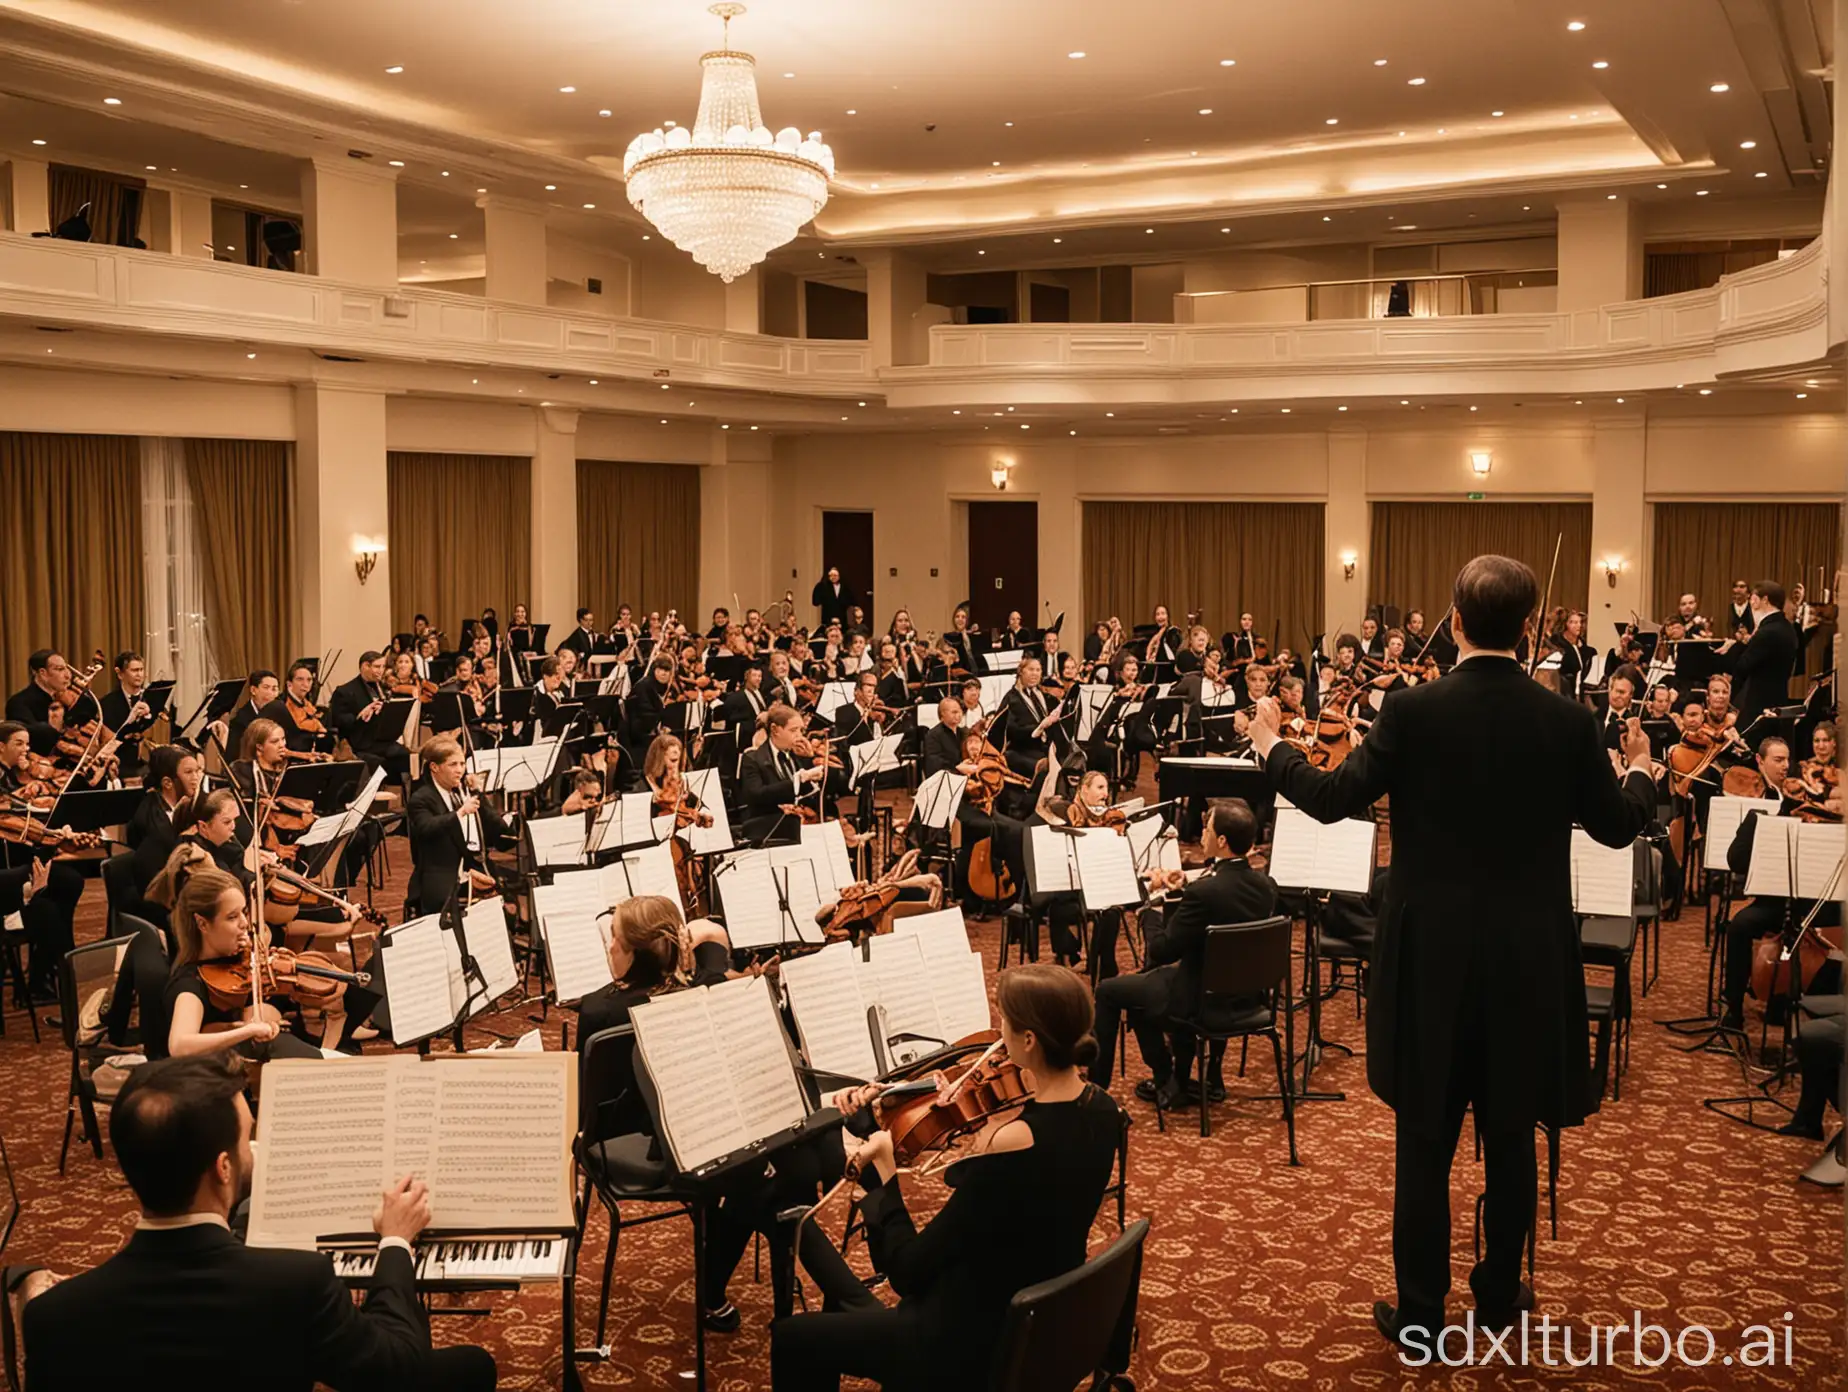 An orchestra is performing in a hotel.